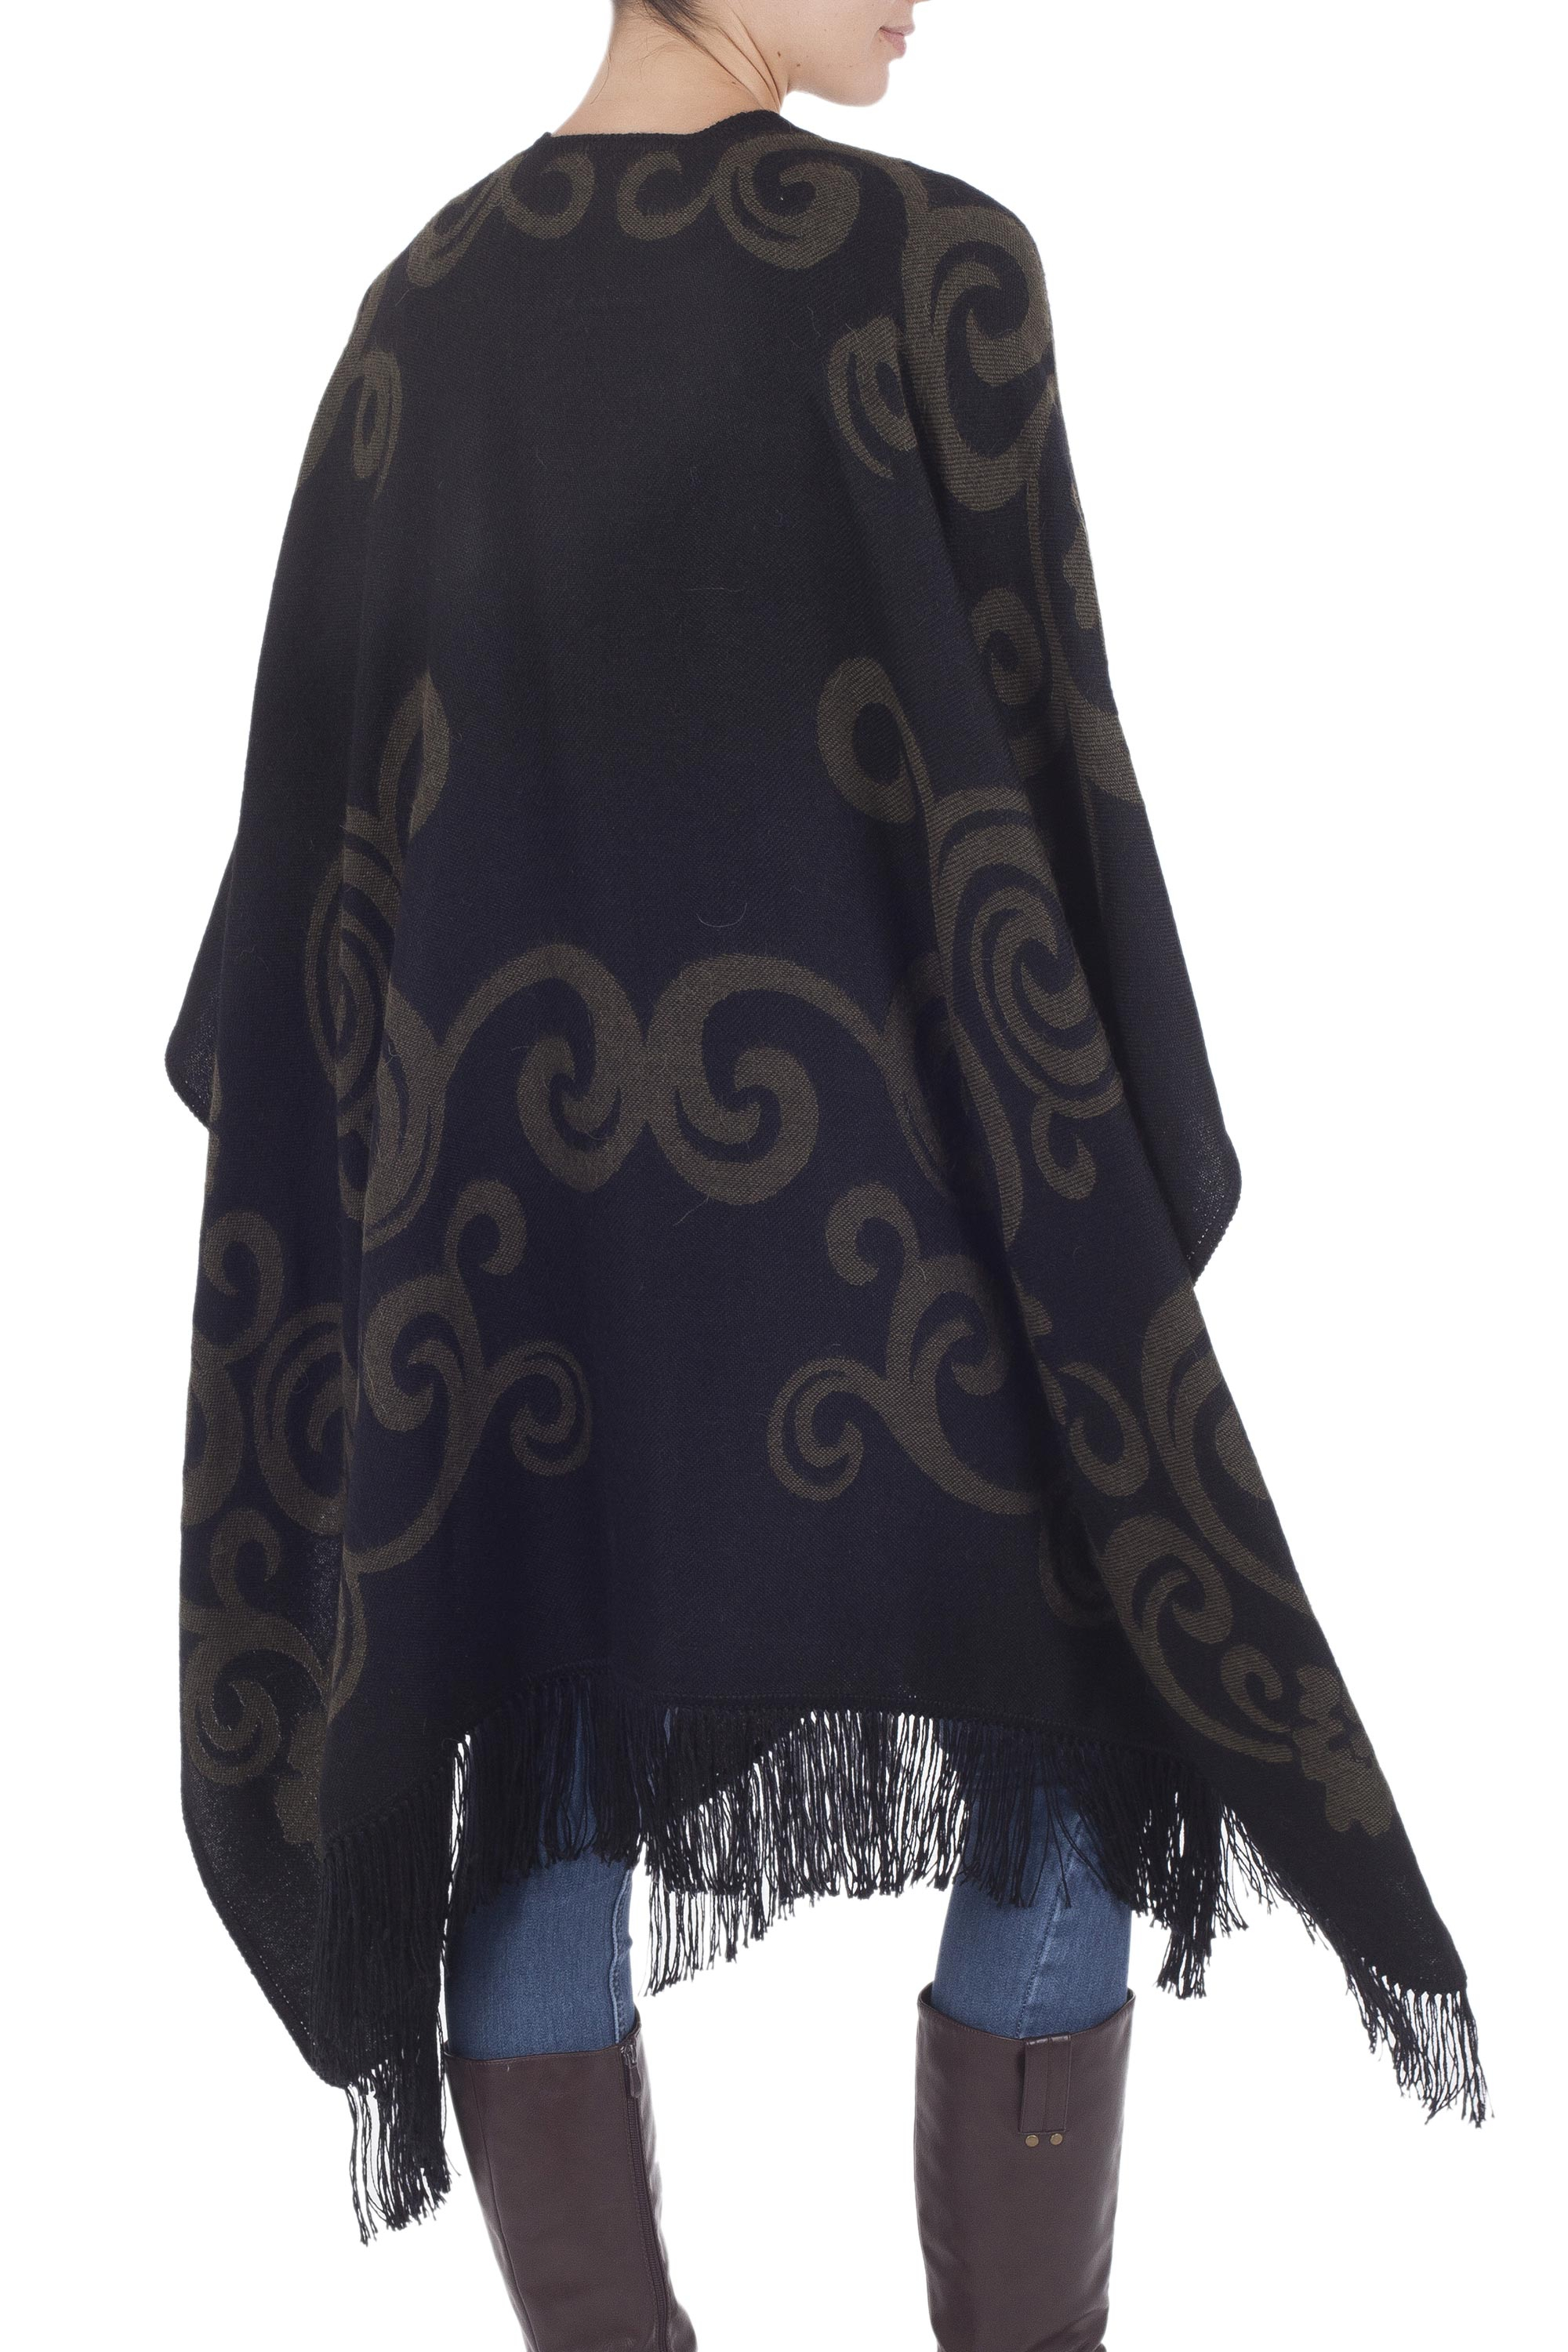 UNICEF Market | Soft Alpaca Wool Blend Ruana Wrap from the Andes ...